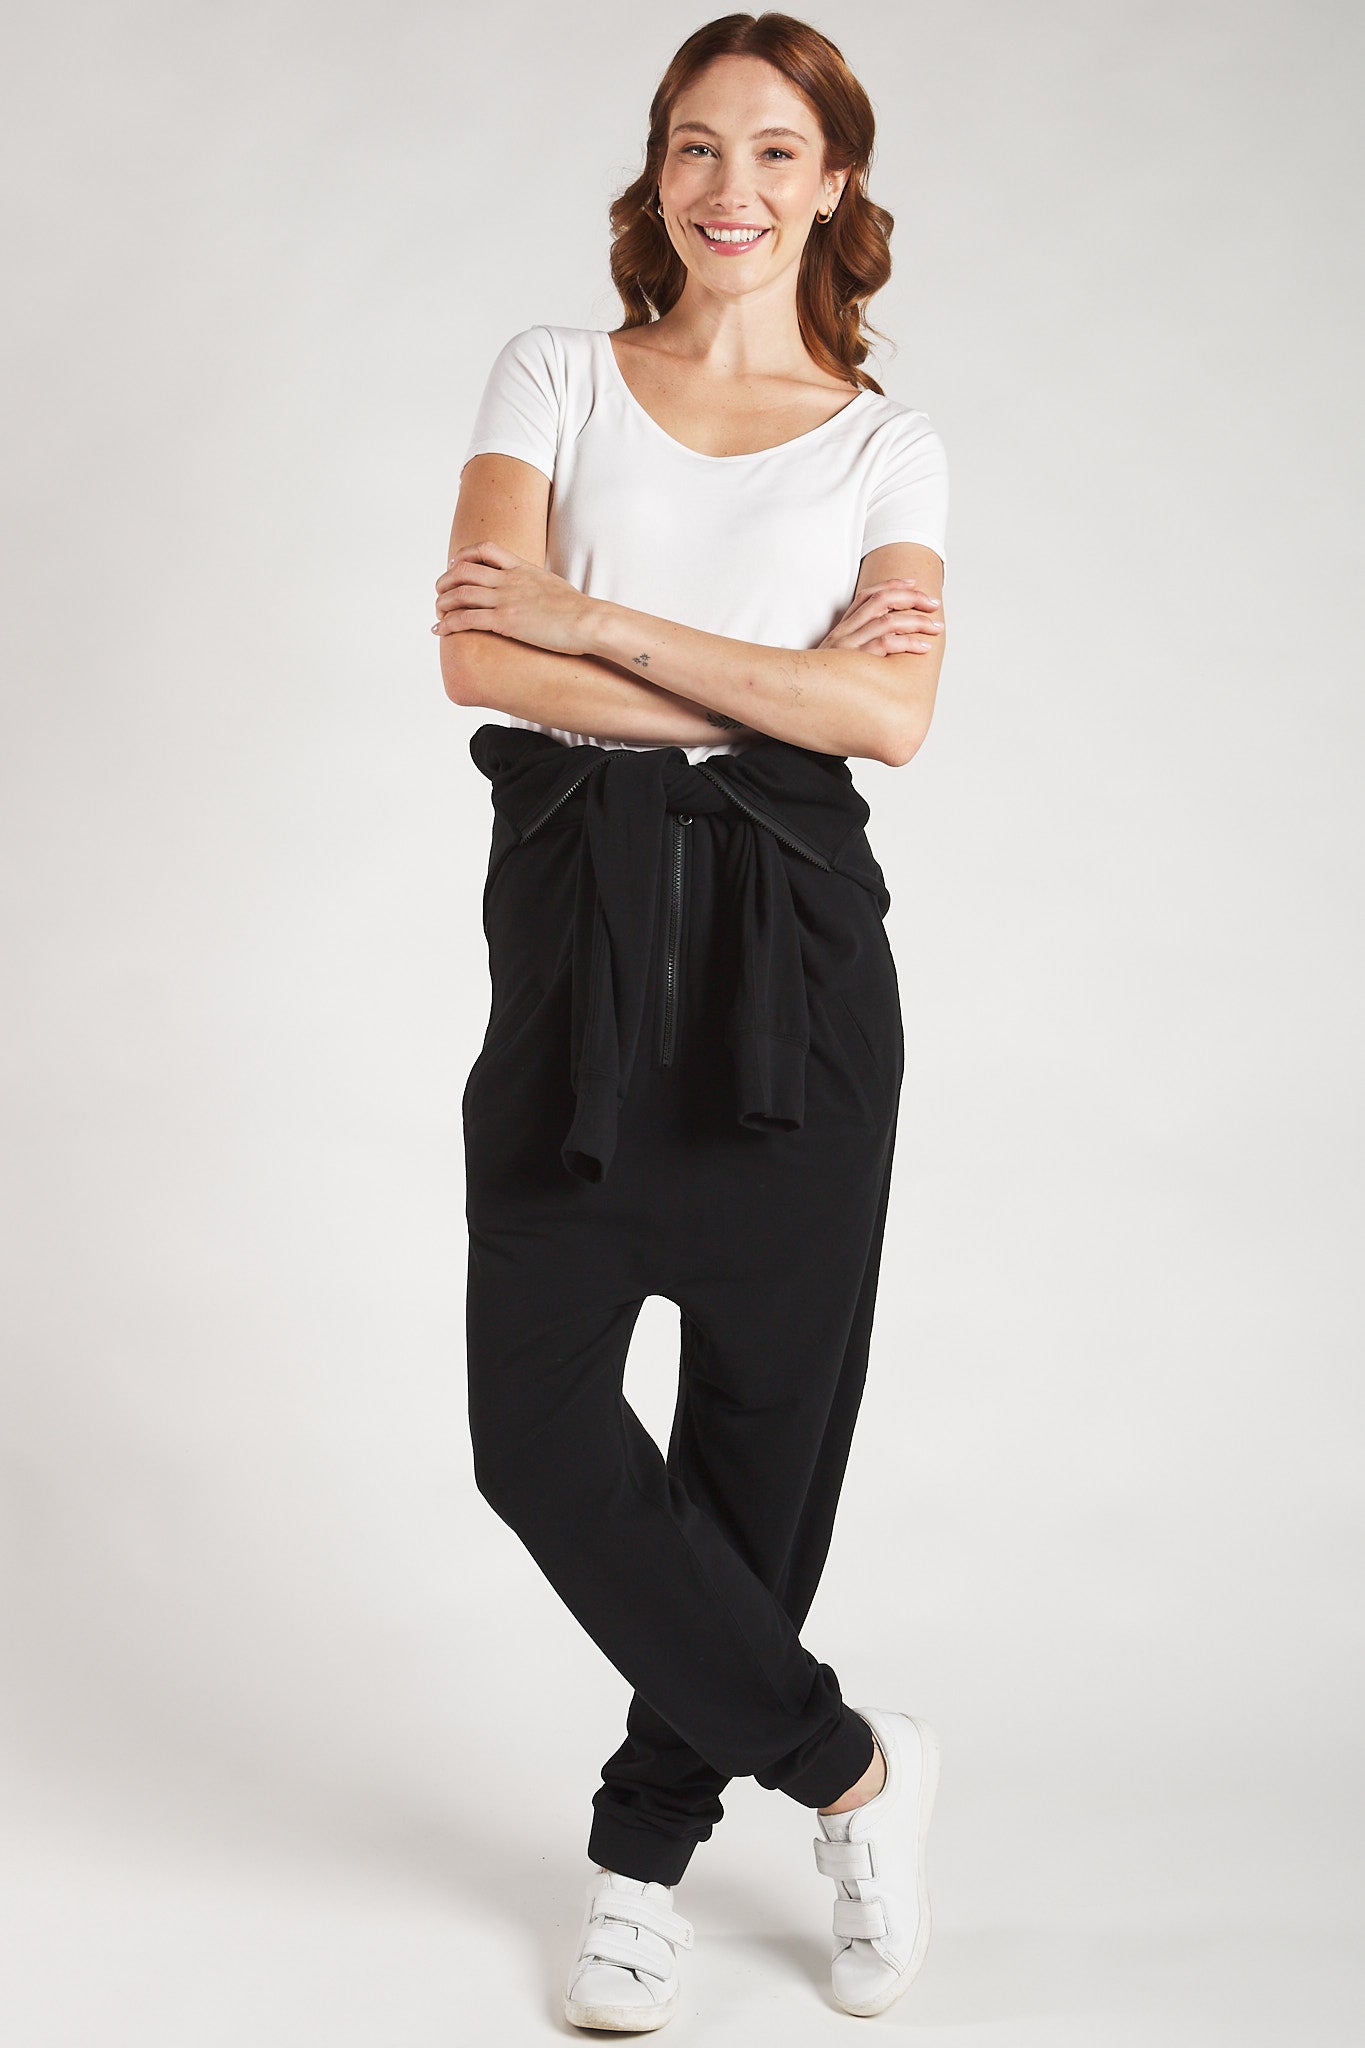 Women’s sustainable black lounge jumpsuit tied at the waist styled with a white t–shirt. 